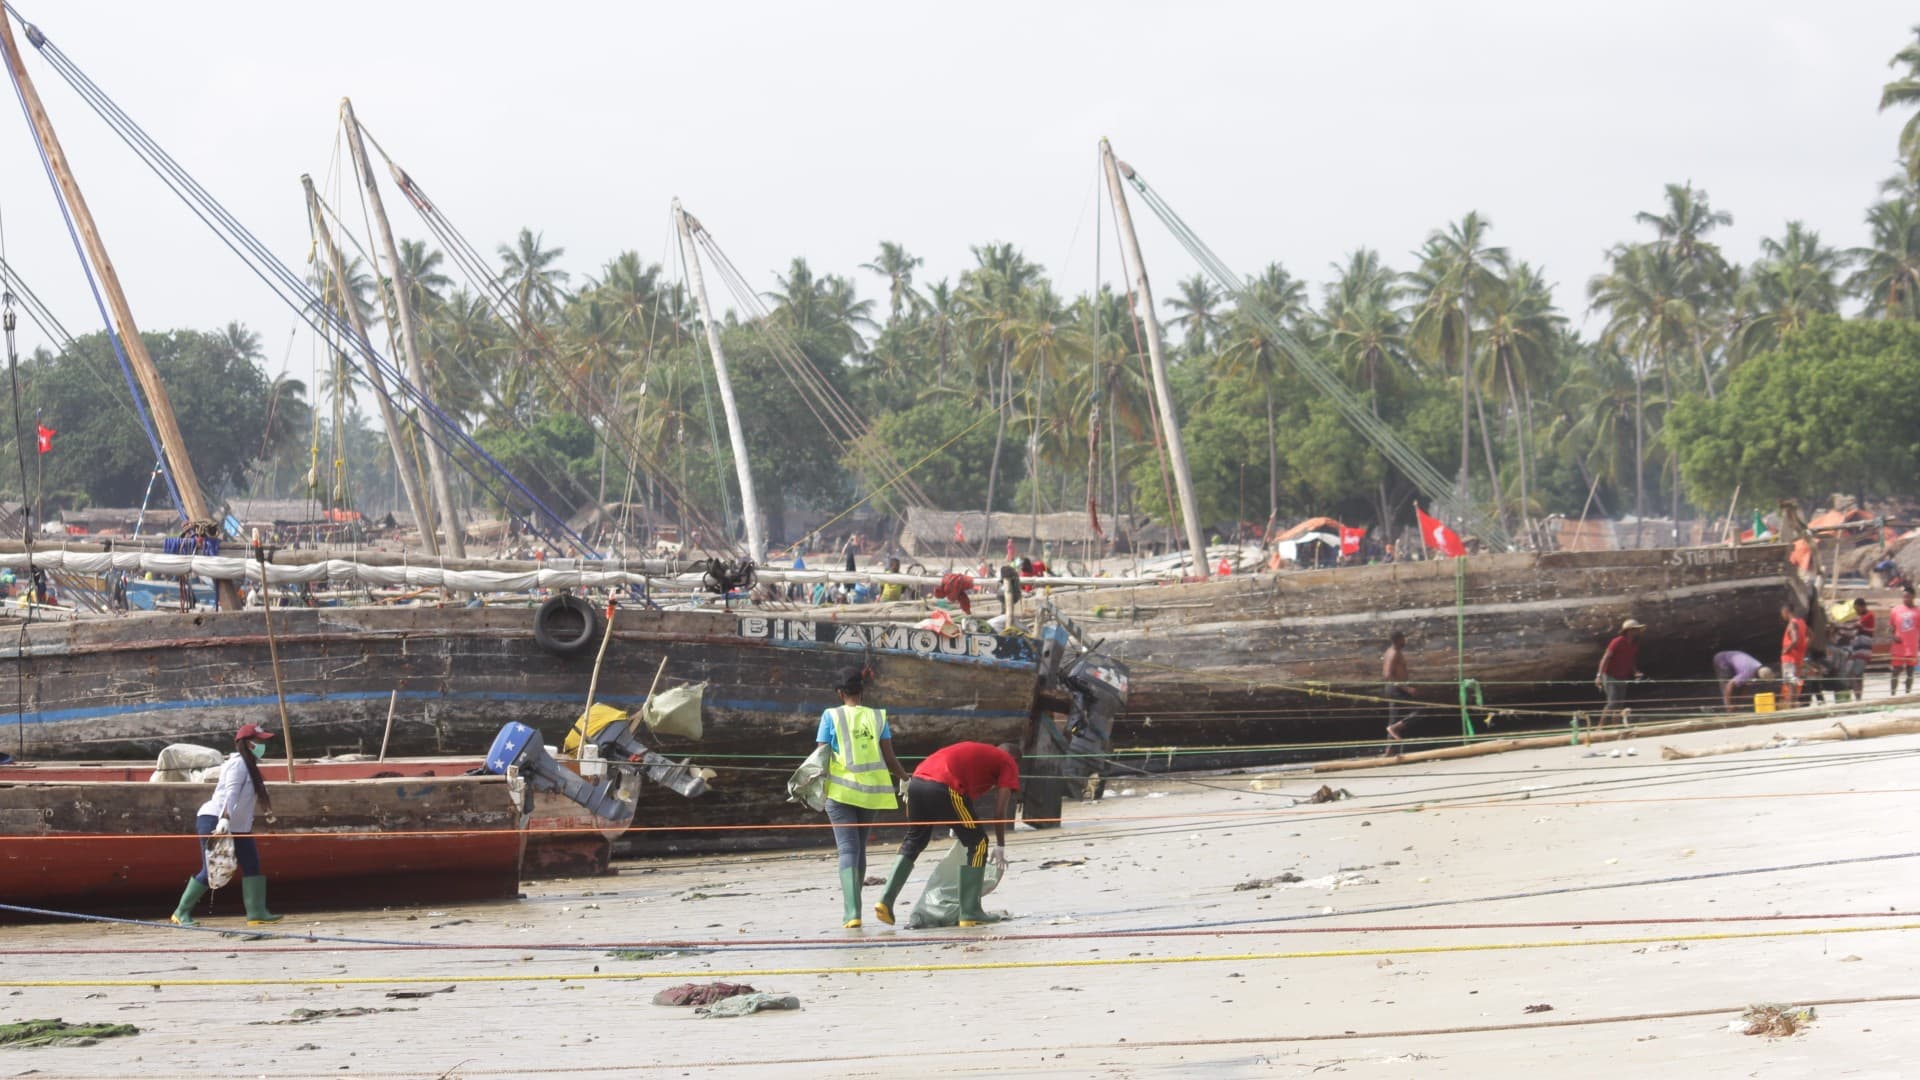 Volunteers clean up the beach in Kipumbwi in Tanzania, with fishing boats in the background. Photo: Supplied